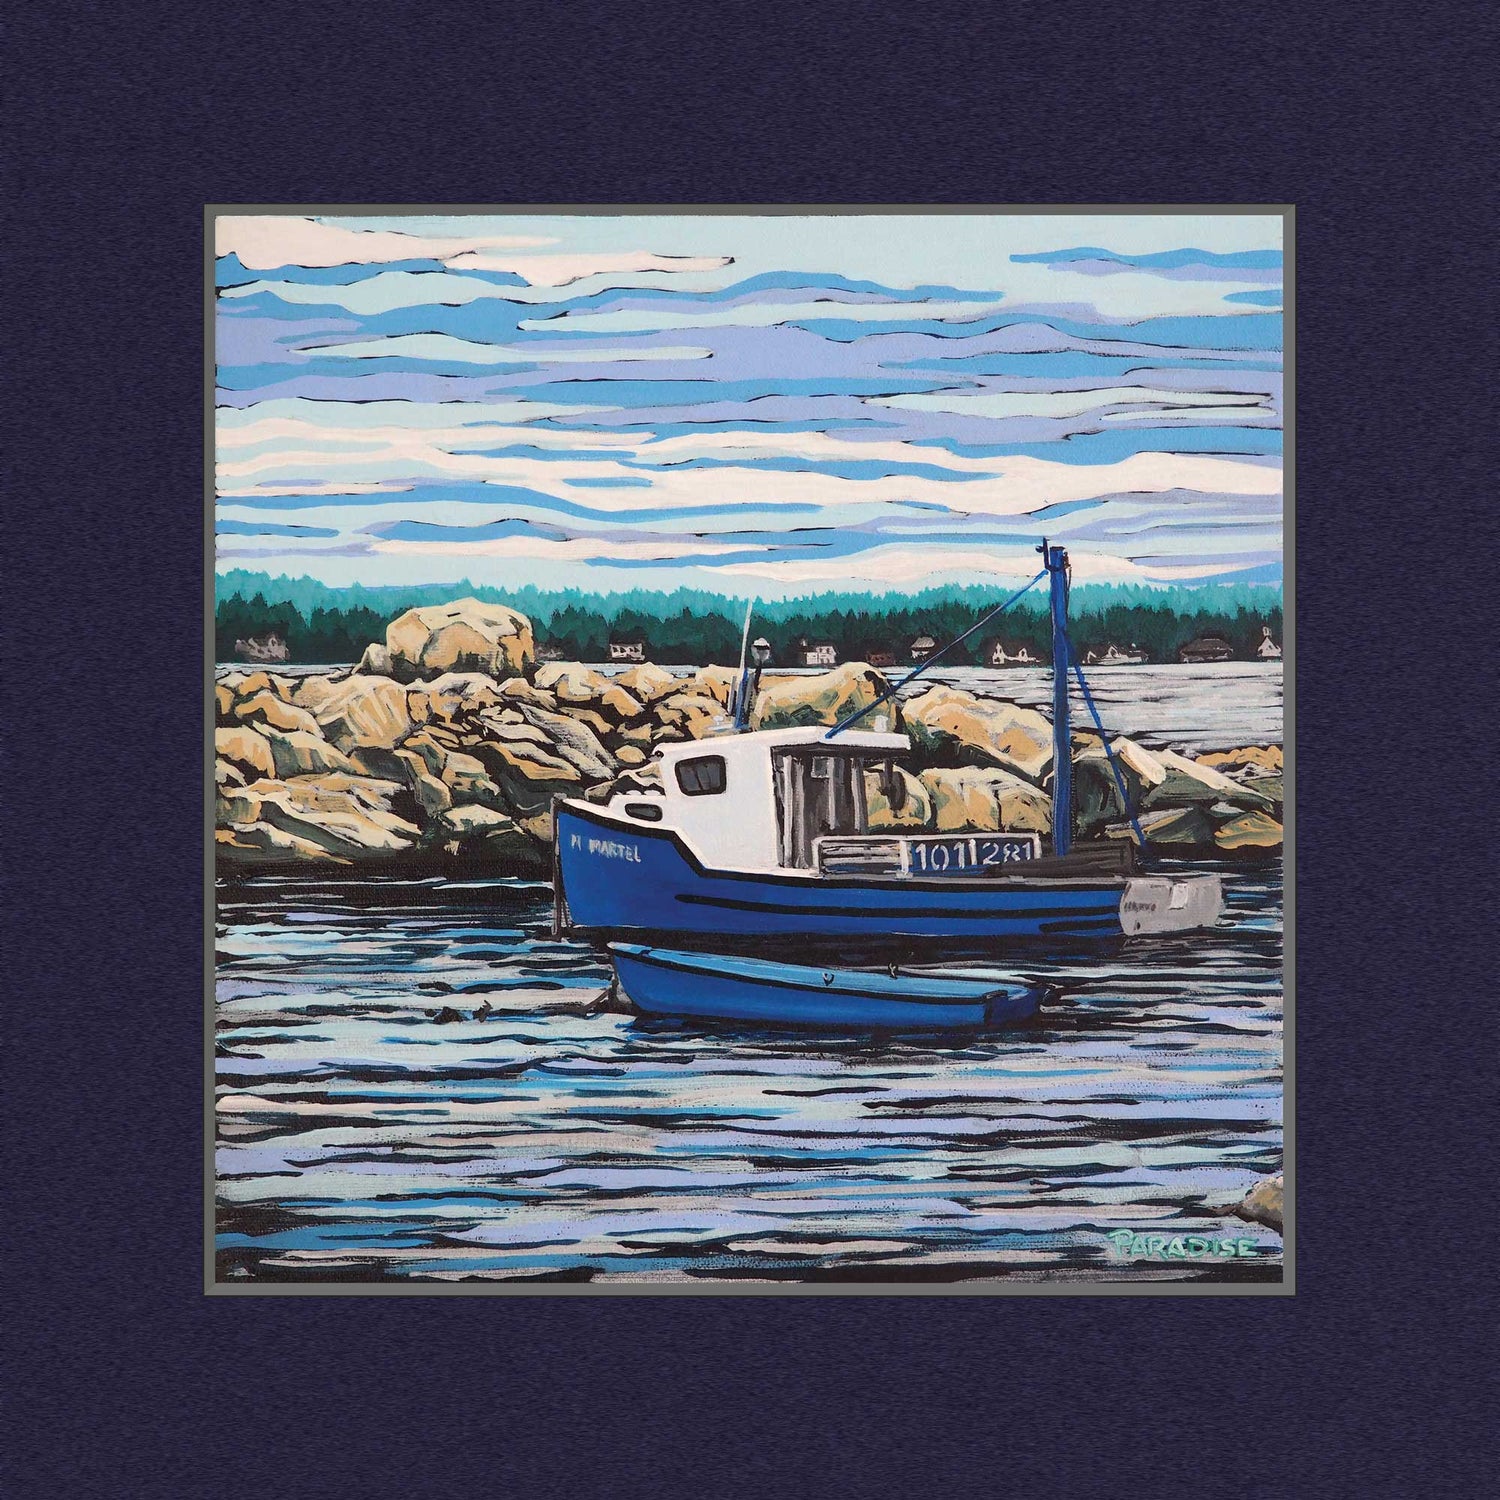 Blue Fishing Boat at Blue Rocks Nova Scotia on the Atlantic coast, high quality print from an original painting by a professional Canadian landscape artist. visual art ready to hang on your wall.